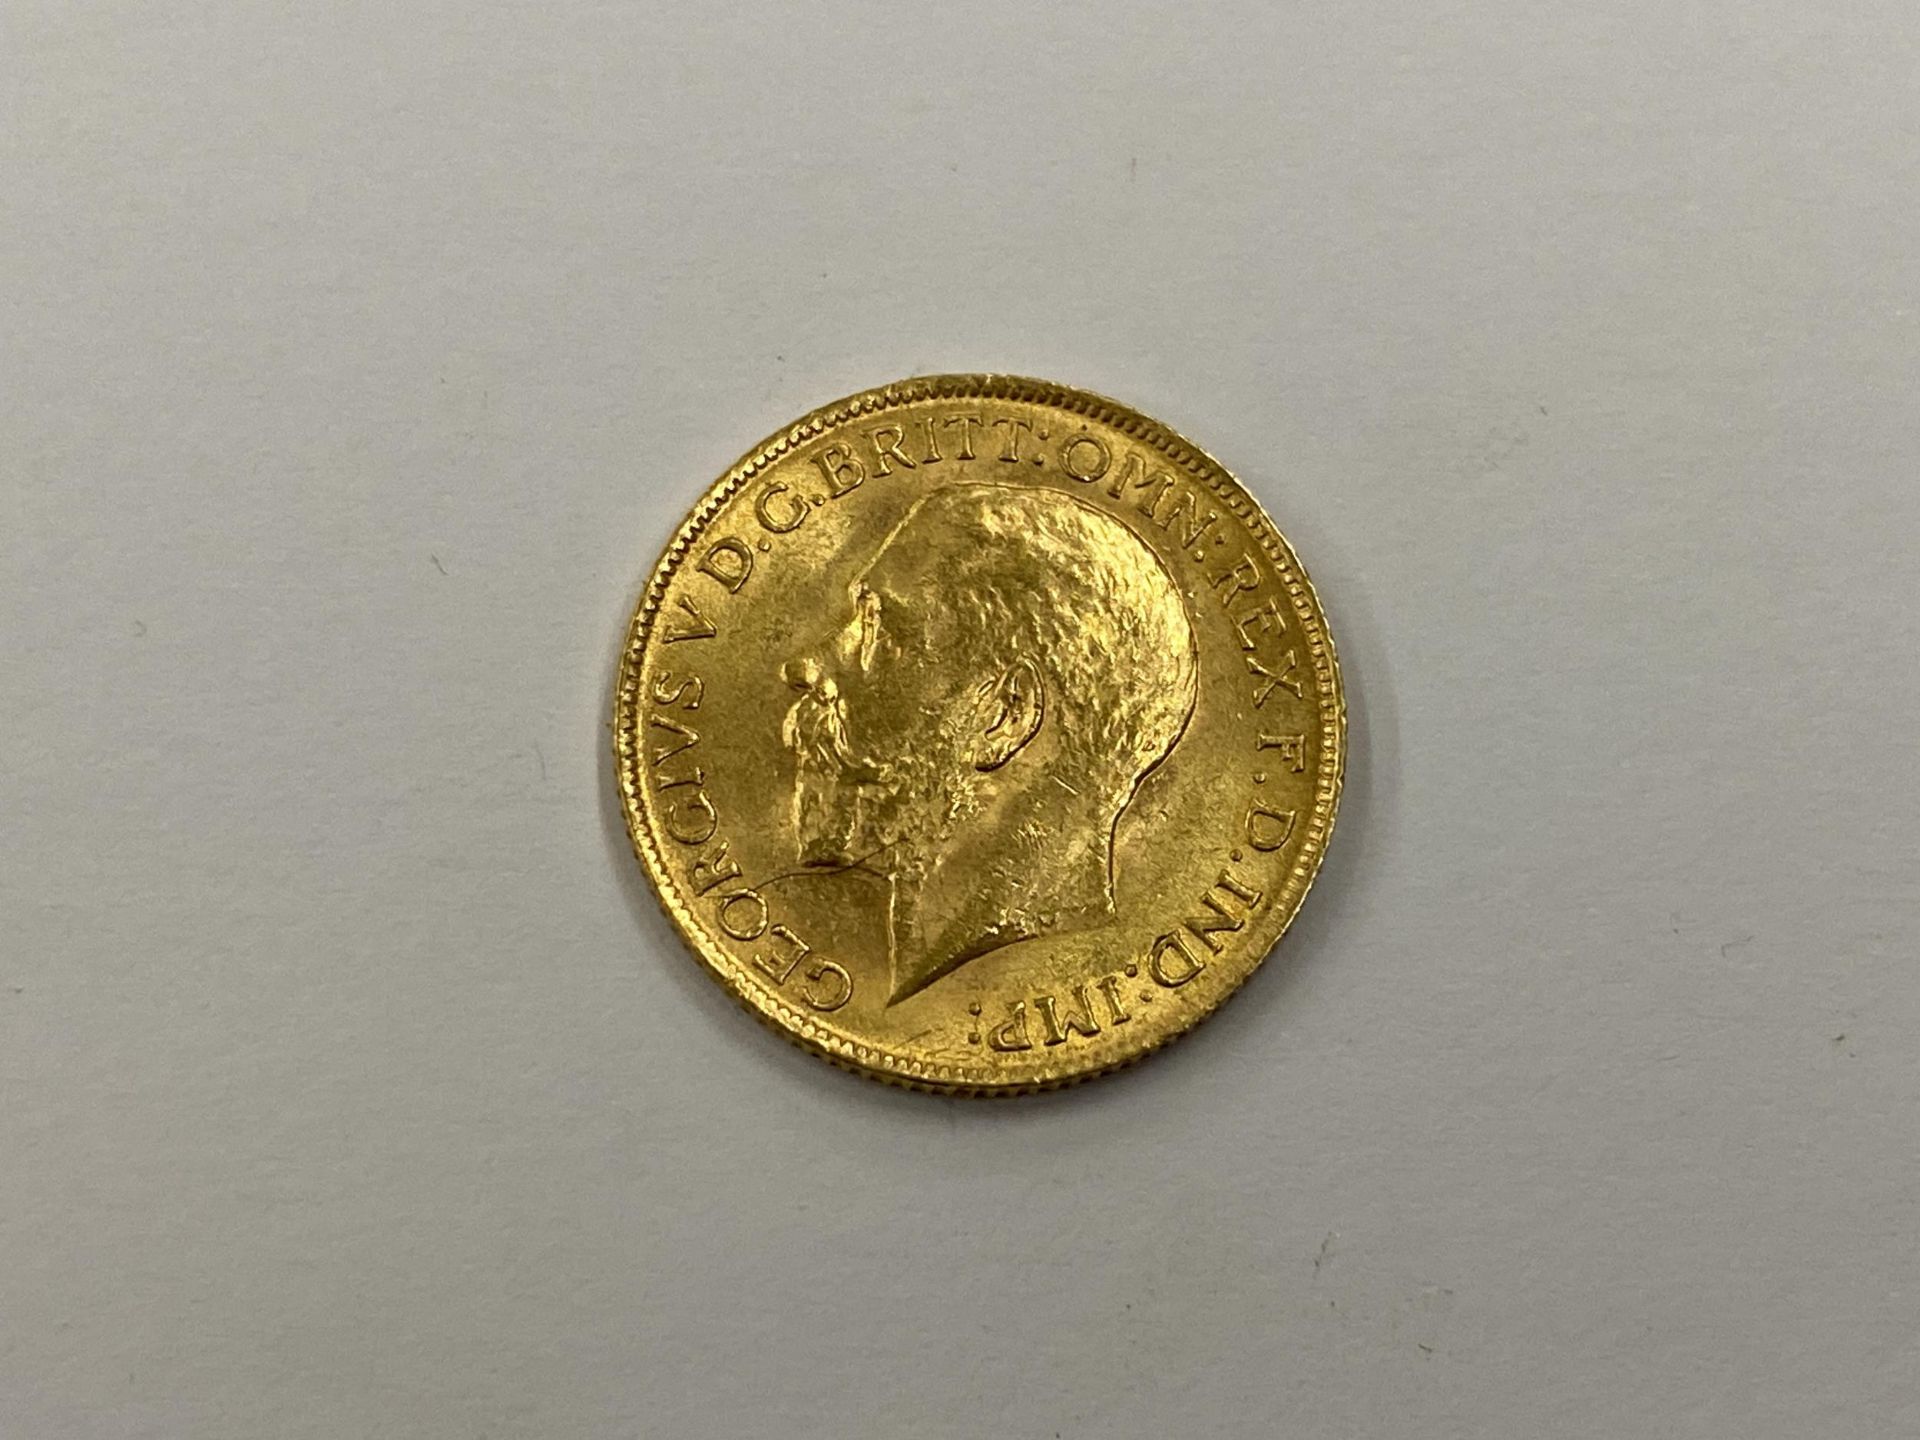 A GEORGE V 1911 GOLD FULL SOVEREIGN COIN - Image 2 of 2